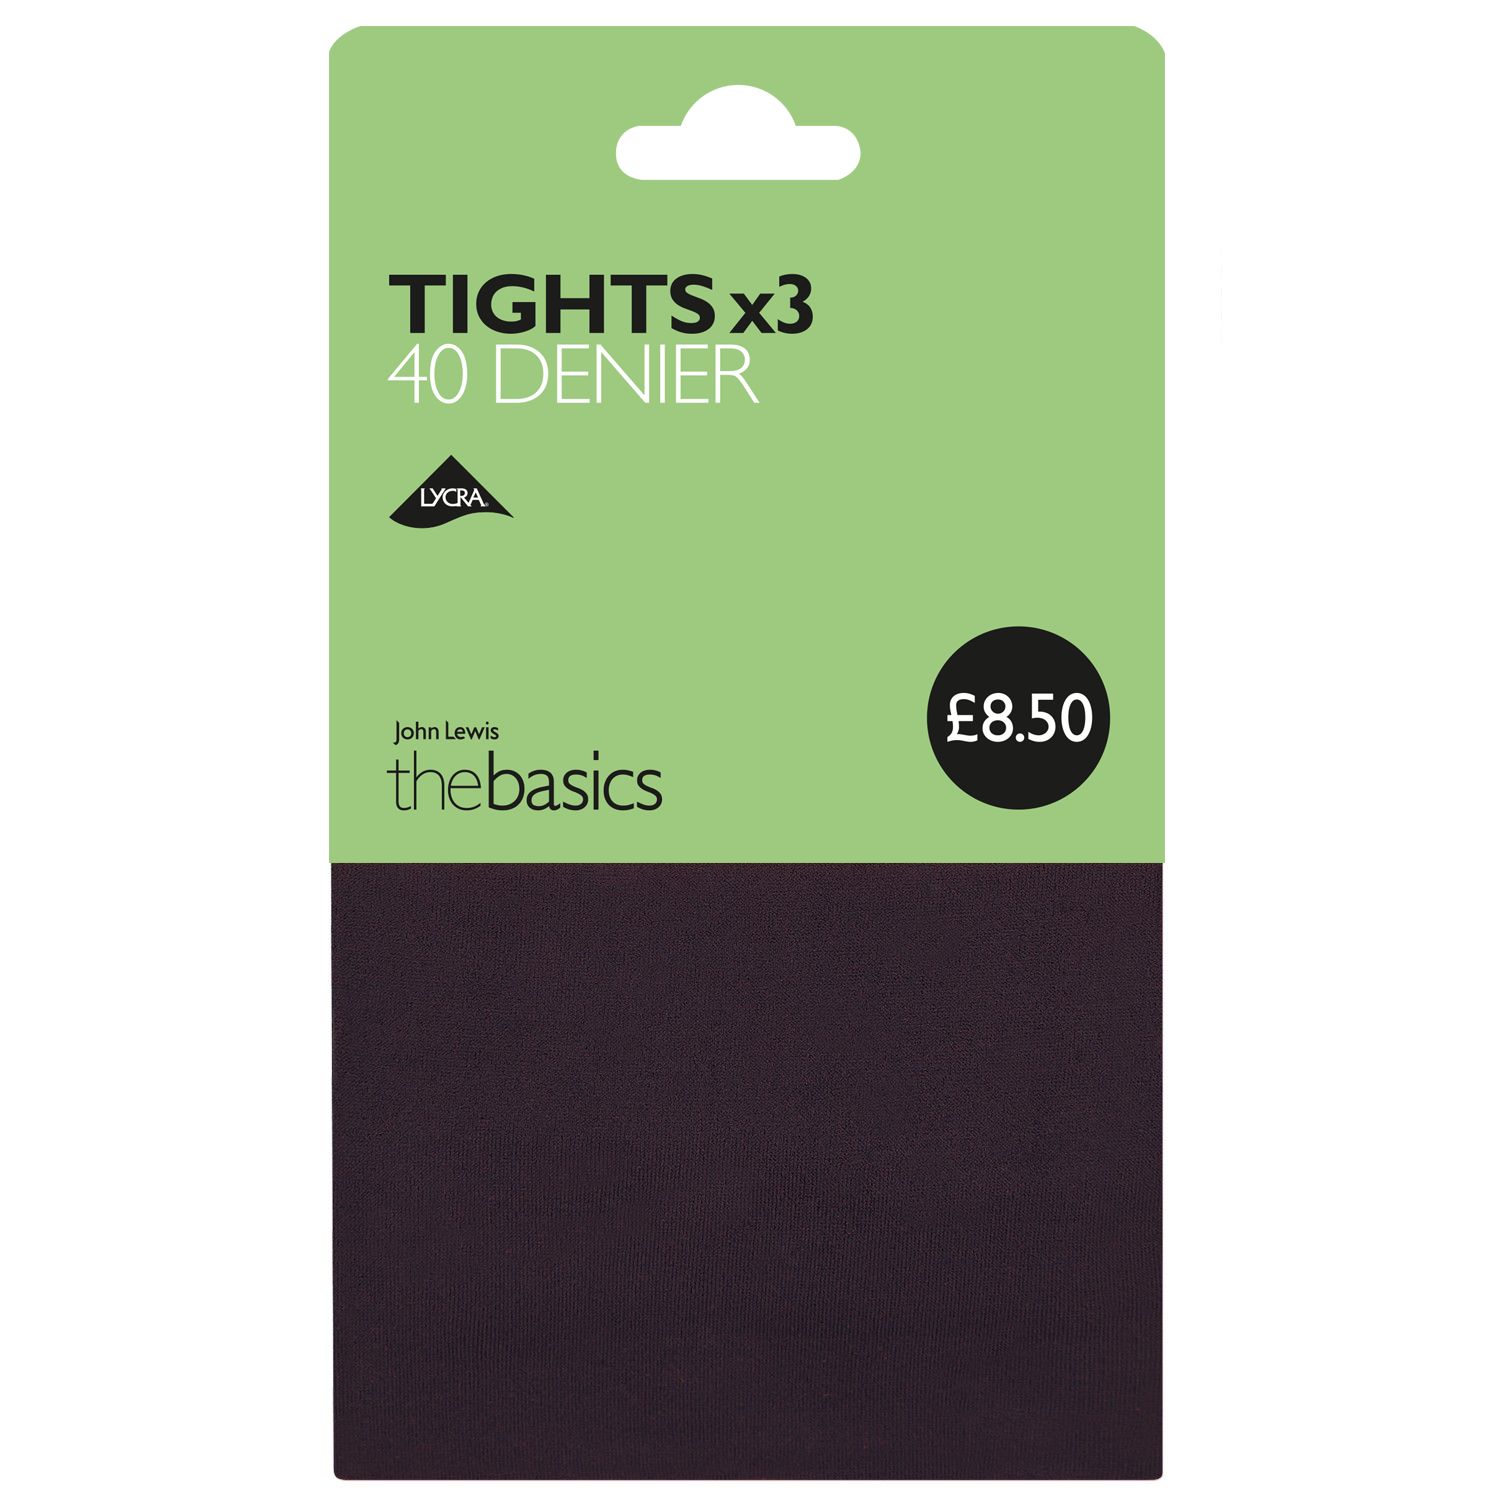 John Lewis 40 Denier Opaque Tights, Pack of 3